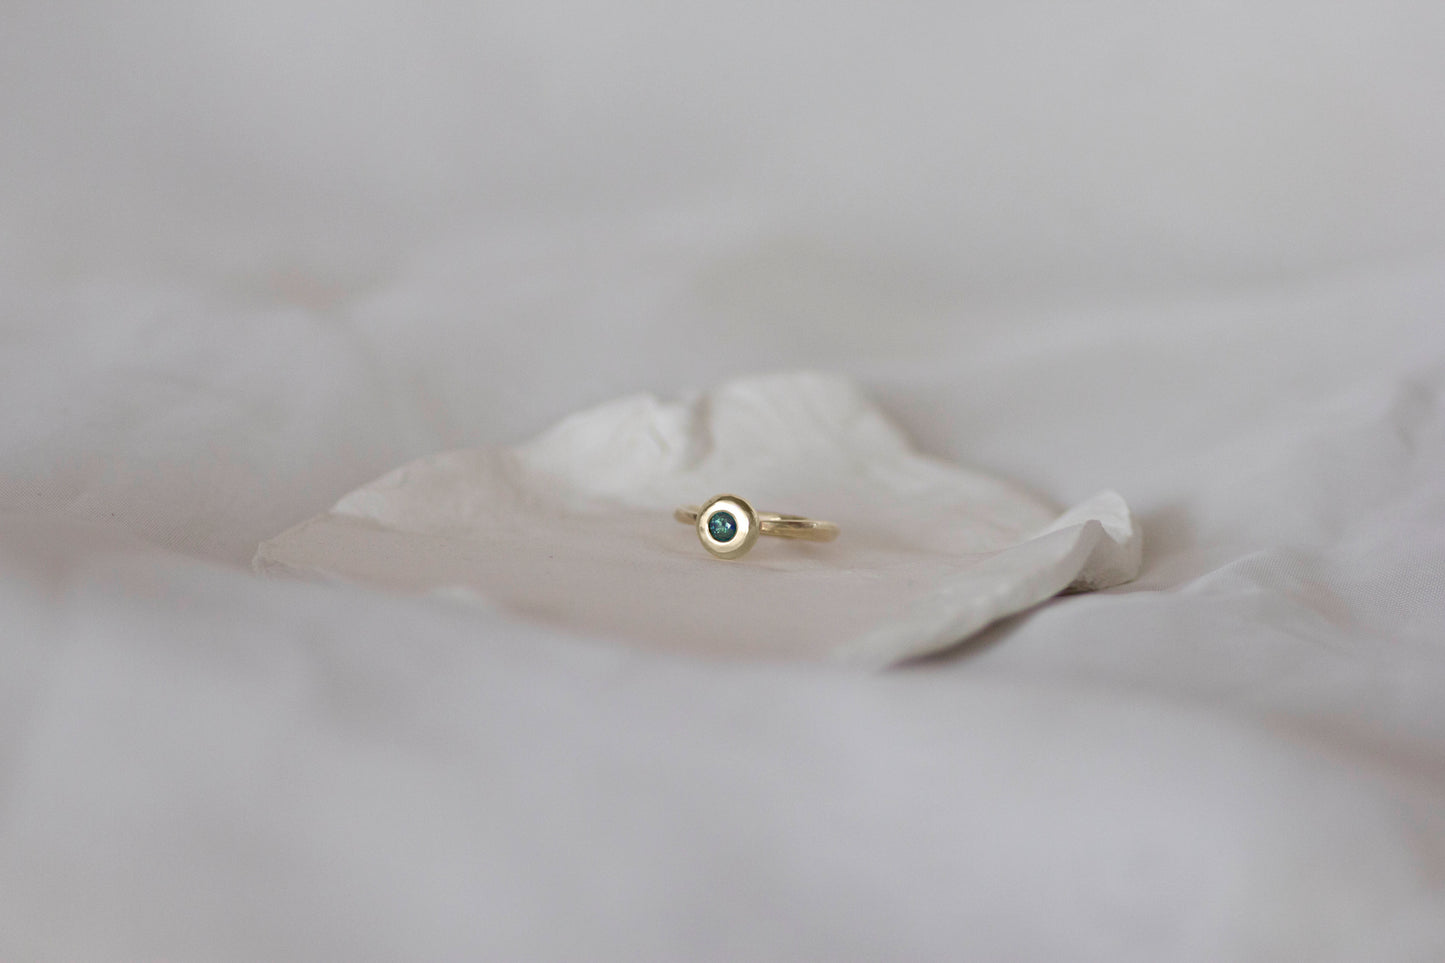 Australian Blue/Green Parti Sapphire set in a heavy, 14ct yellow gold ring sitting on a white ceramic dish by jane finch